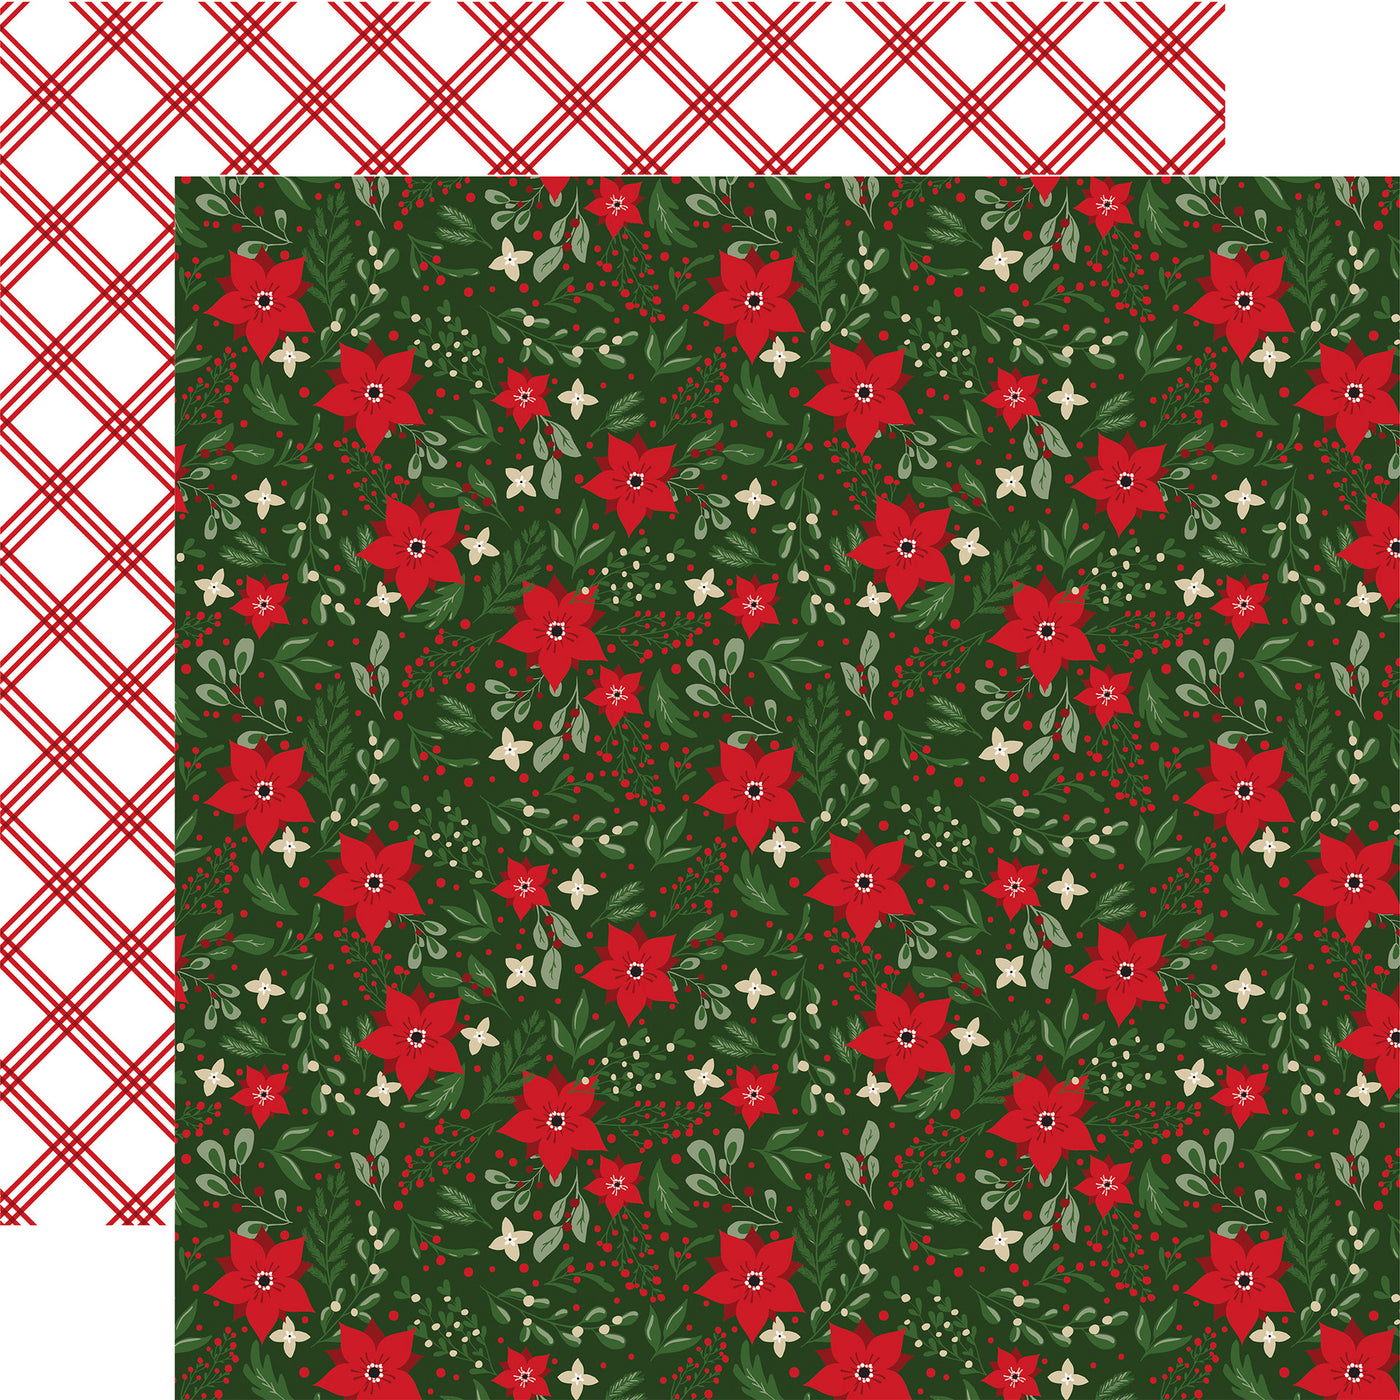 Archival safe (Side A - poinsettias and holly floral on a dark green background, Side B - red diagonal plaid on a white background)